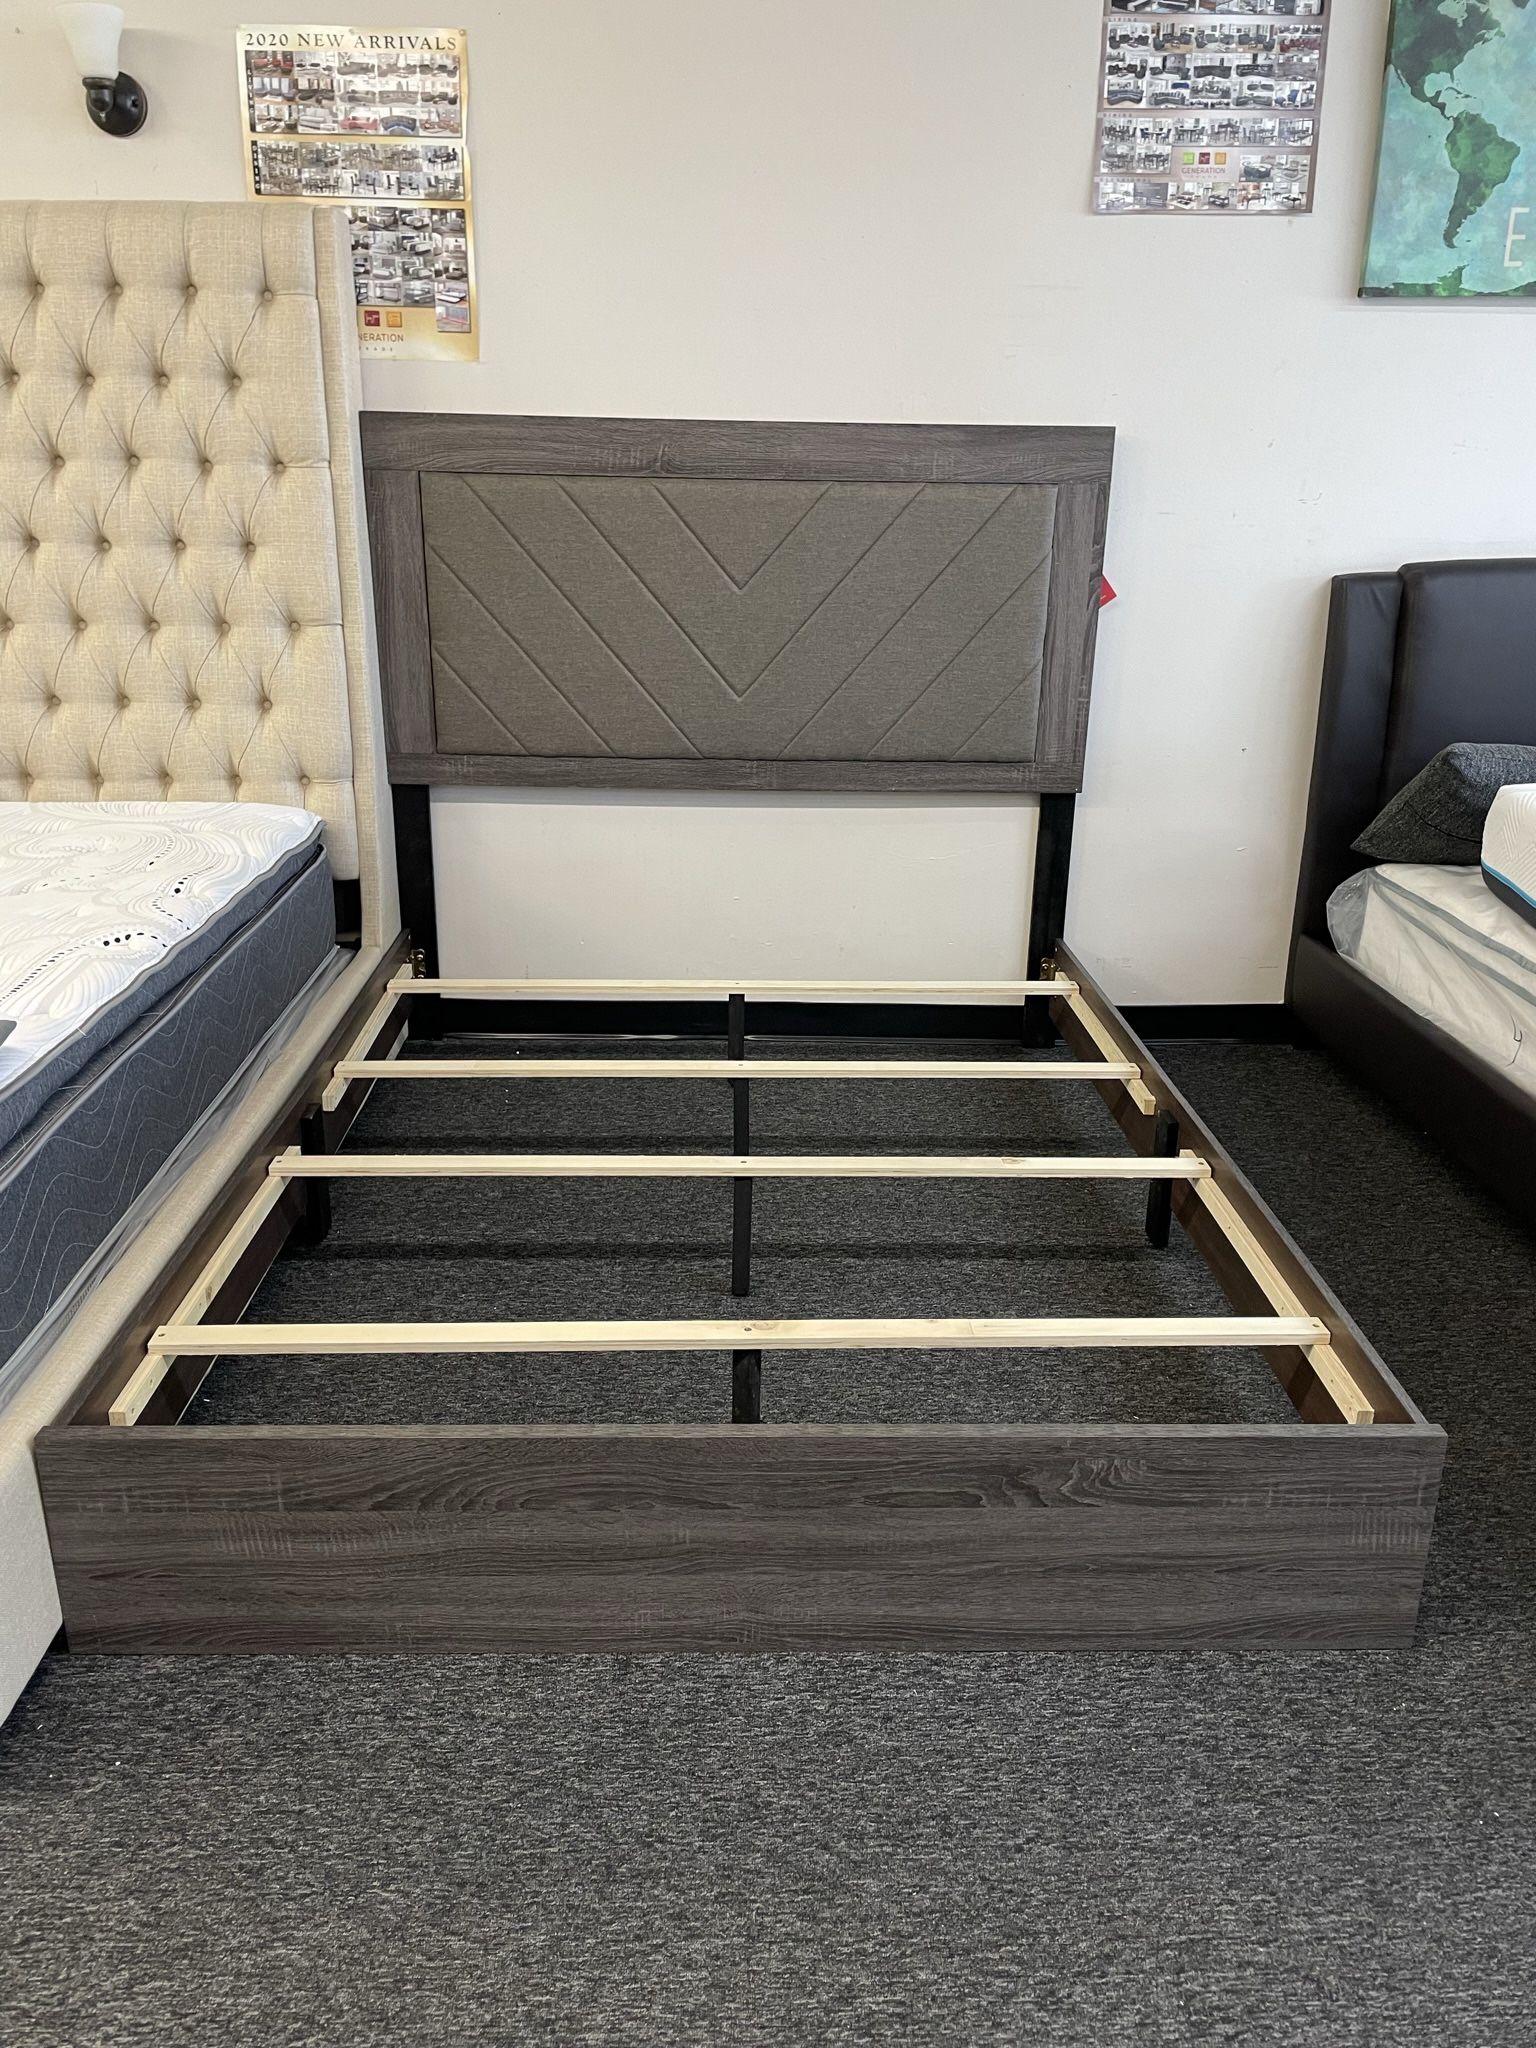 (JUST $54 DOWN) Brand New Queen Bed (Financing and Delivery available)